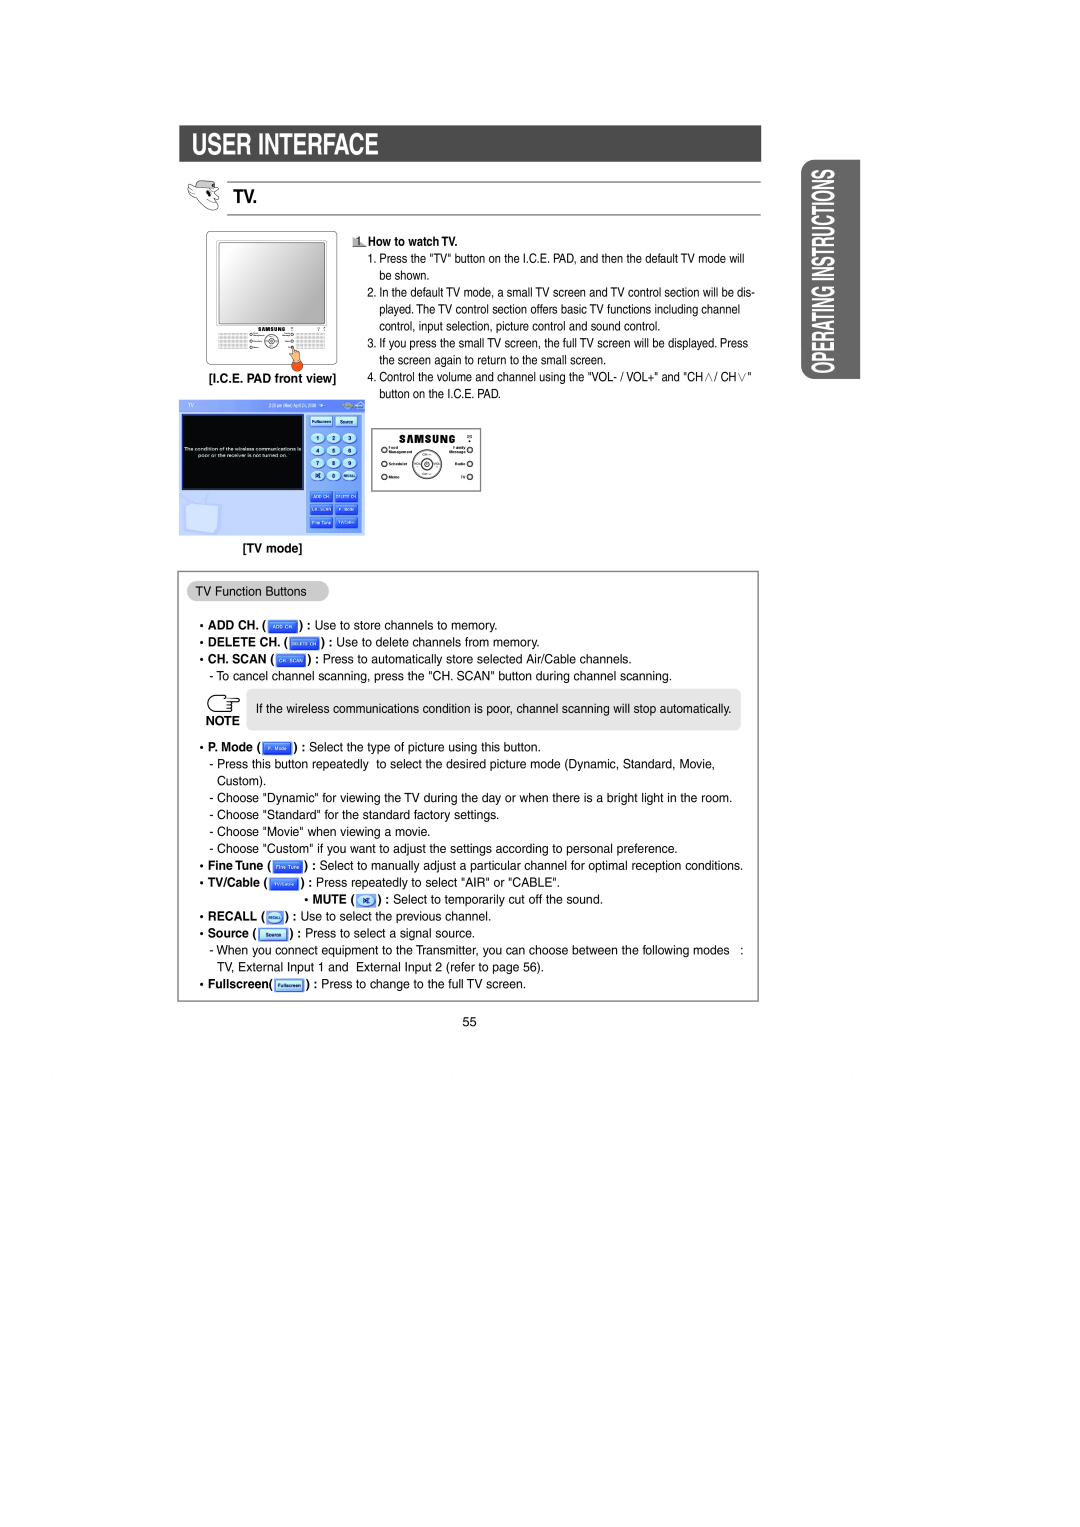 Samsung RH269LBSH owner manual Instructionssigns, User Interface, I.C.E. PAD front view, How to watch TV, TV mode, P. Mode 